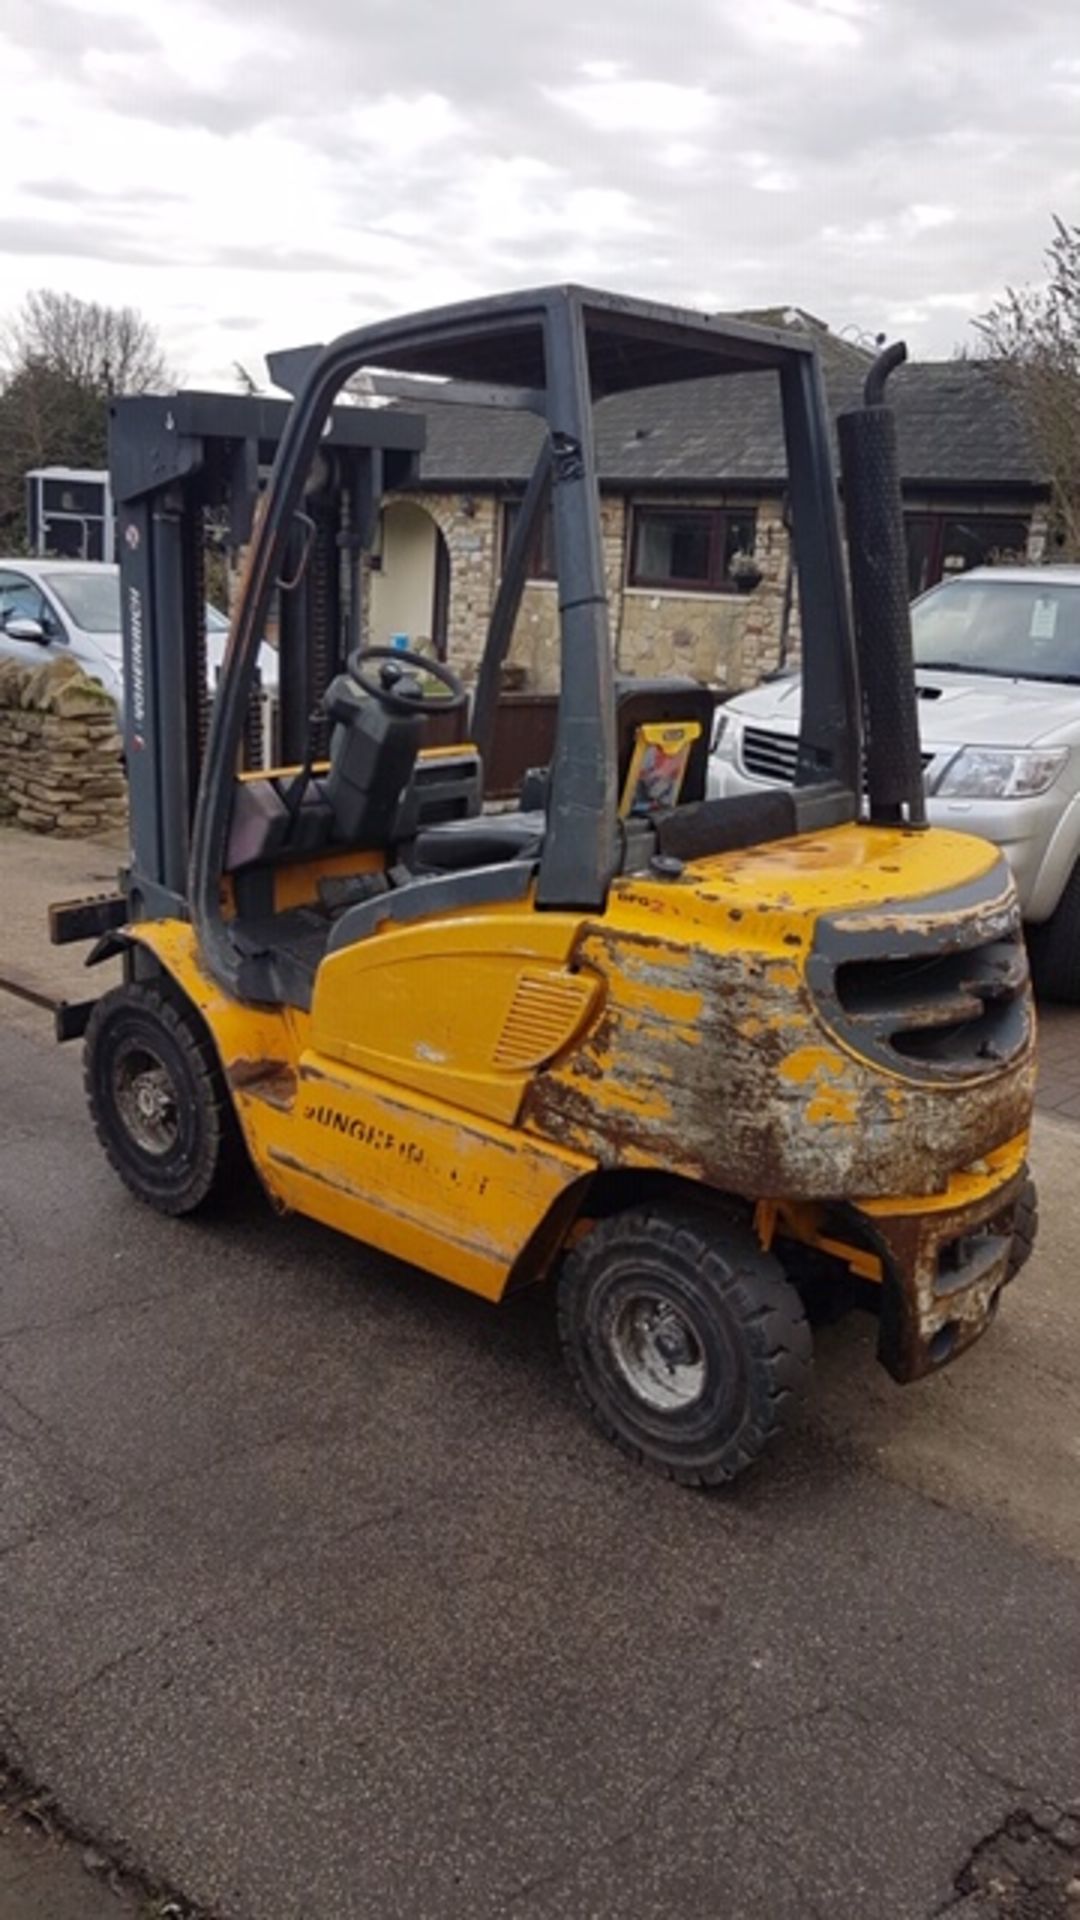 JUNGHEINRICH DFG25 DIESEL POWERED FORKLIFT TRUCK, CONTAINER SPEC 3 STAGE MAST, 2.5 TONNE RATED - Image 4 of 4